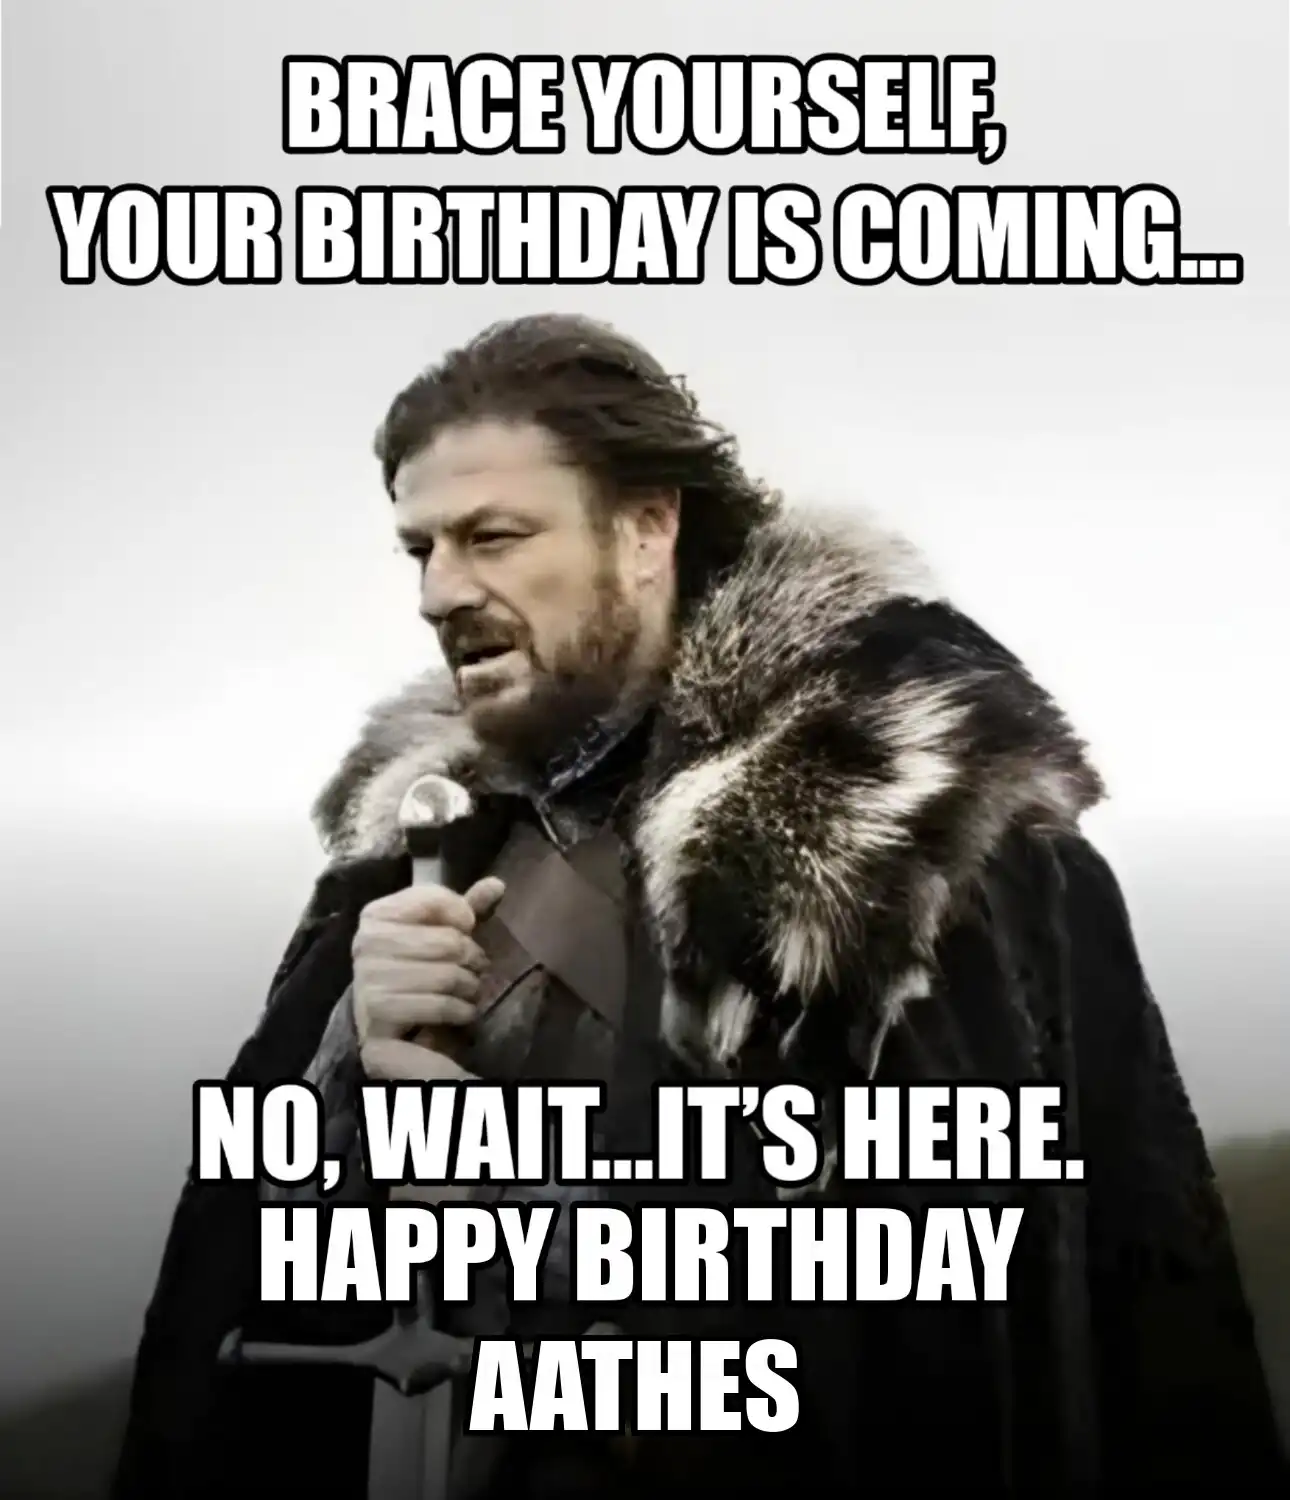 Happy Birthday Aathes Brace Yourself Your Birthday Is Coming Meme